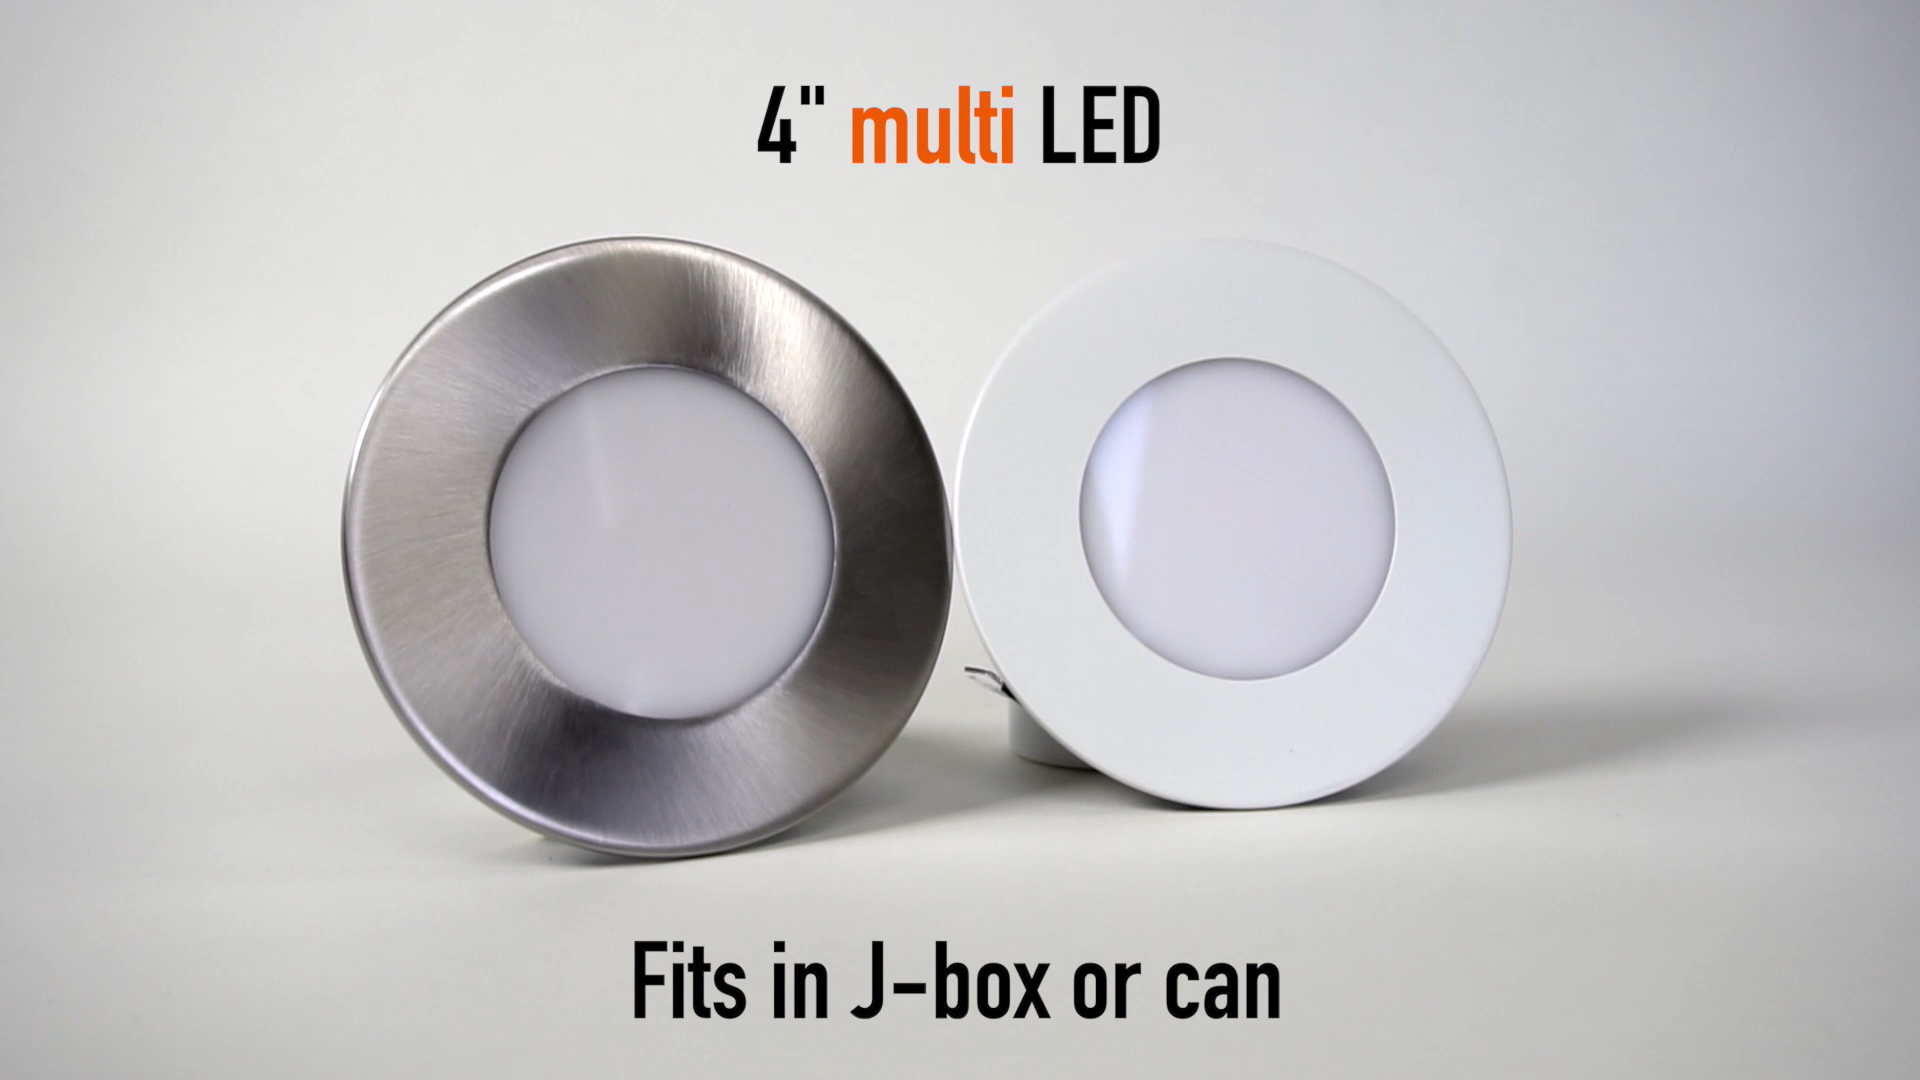 click here to watch this video and discover our 4 Inch Multi Fit LED Lighting LED Lights